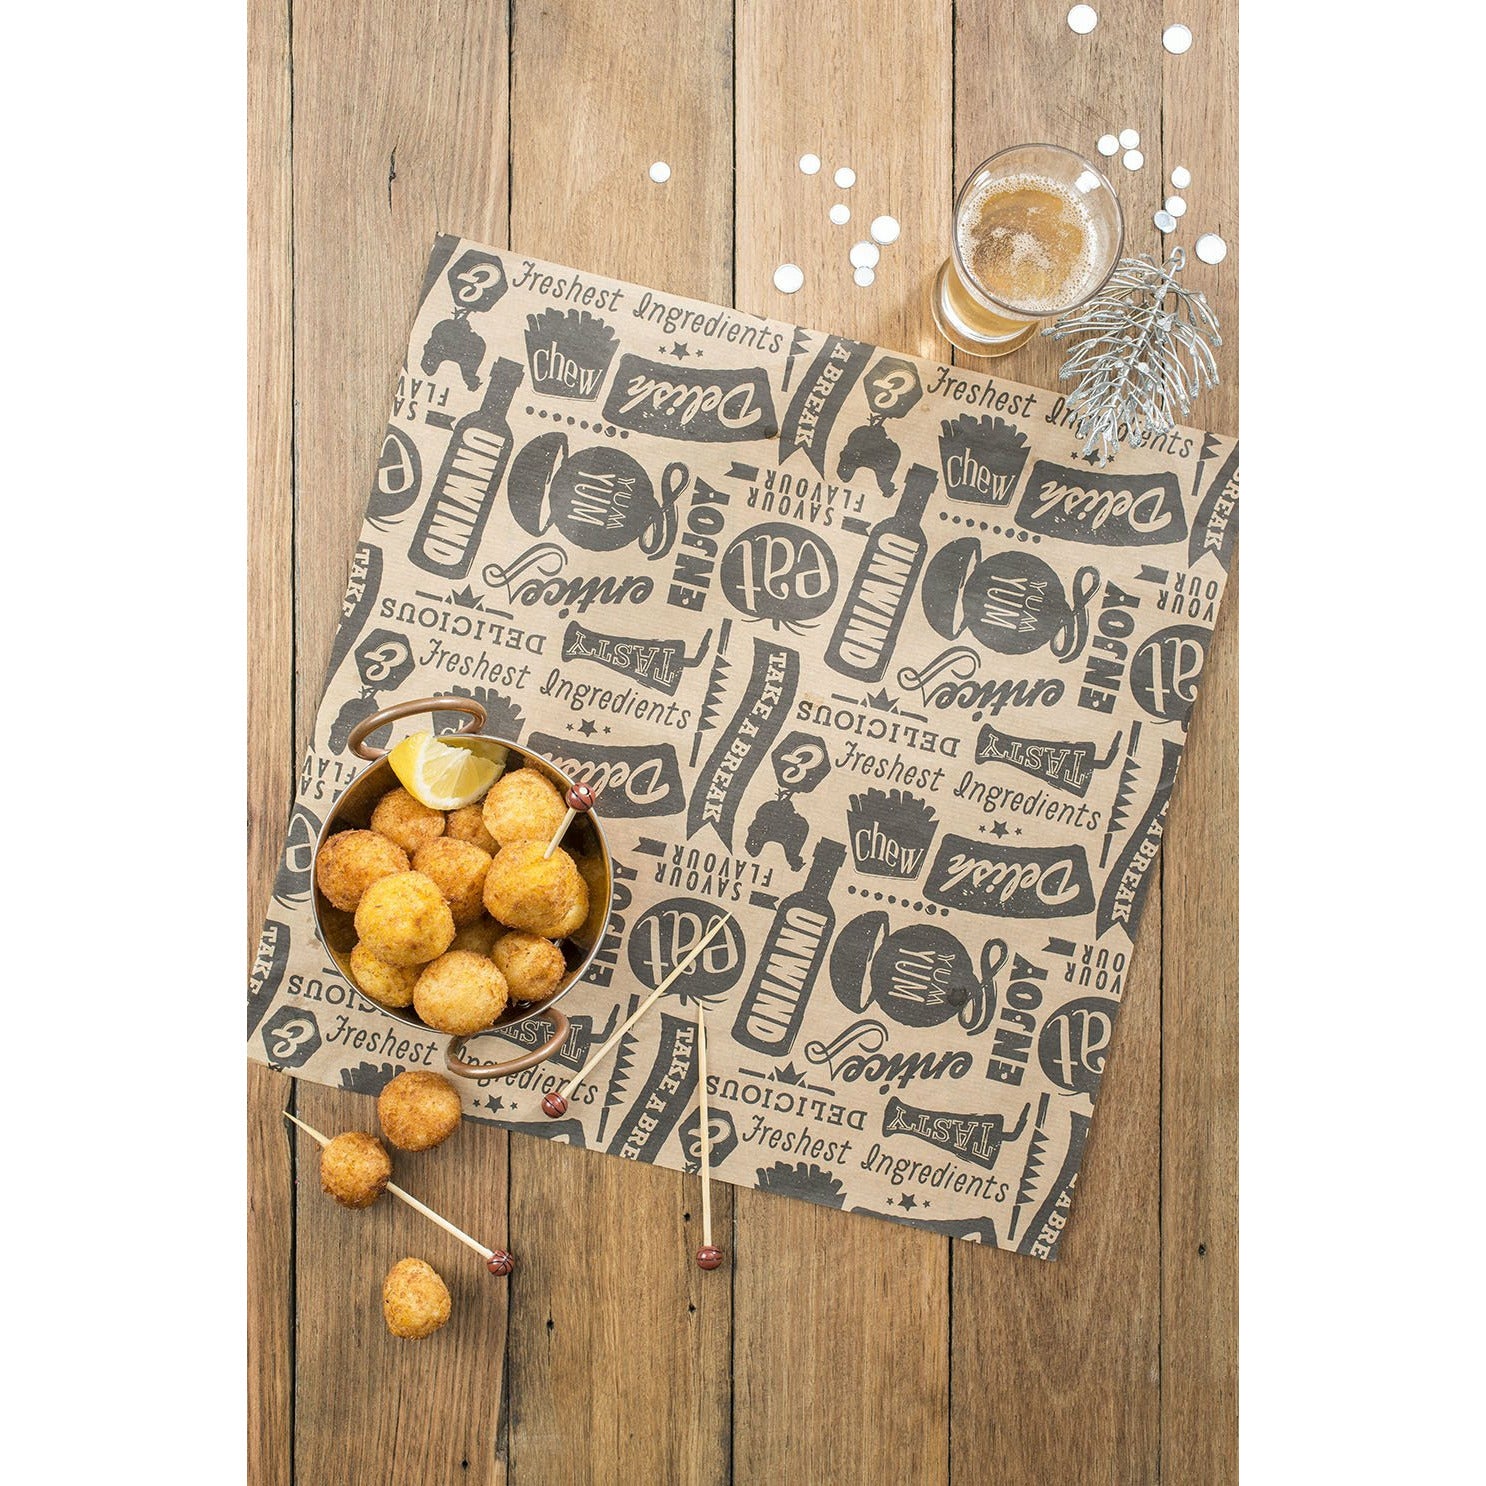 Top Shelf Concepts Bistro Greaseproof Paper (Case of 50)